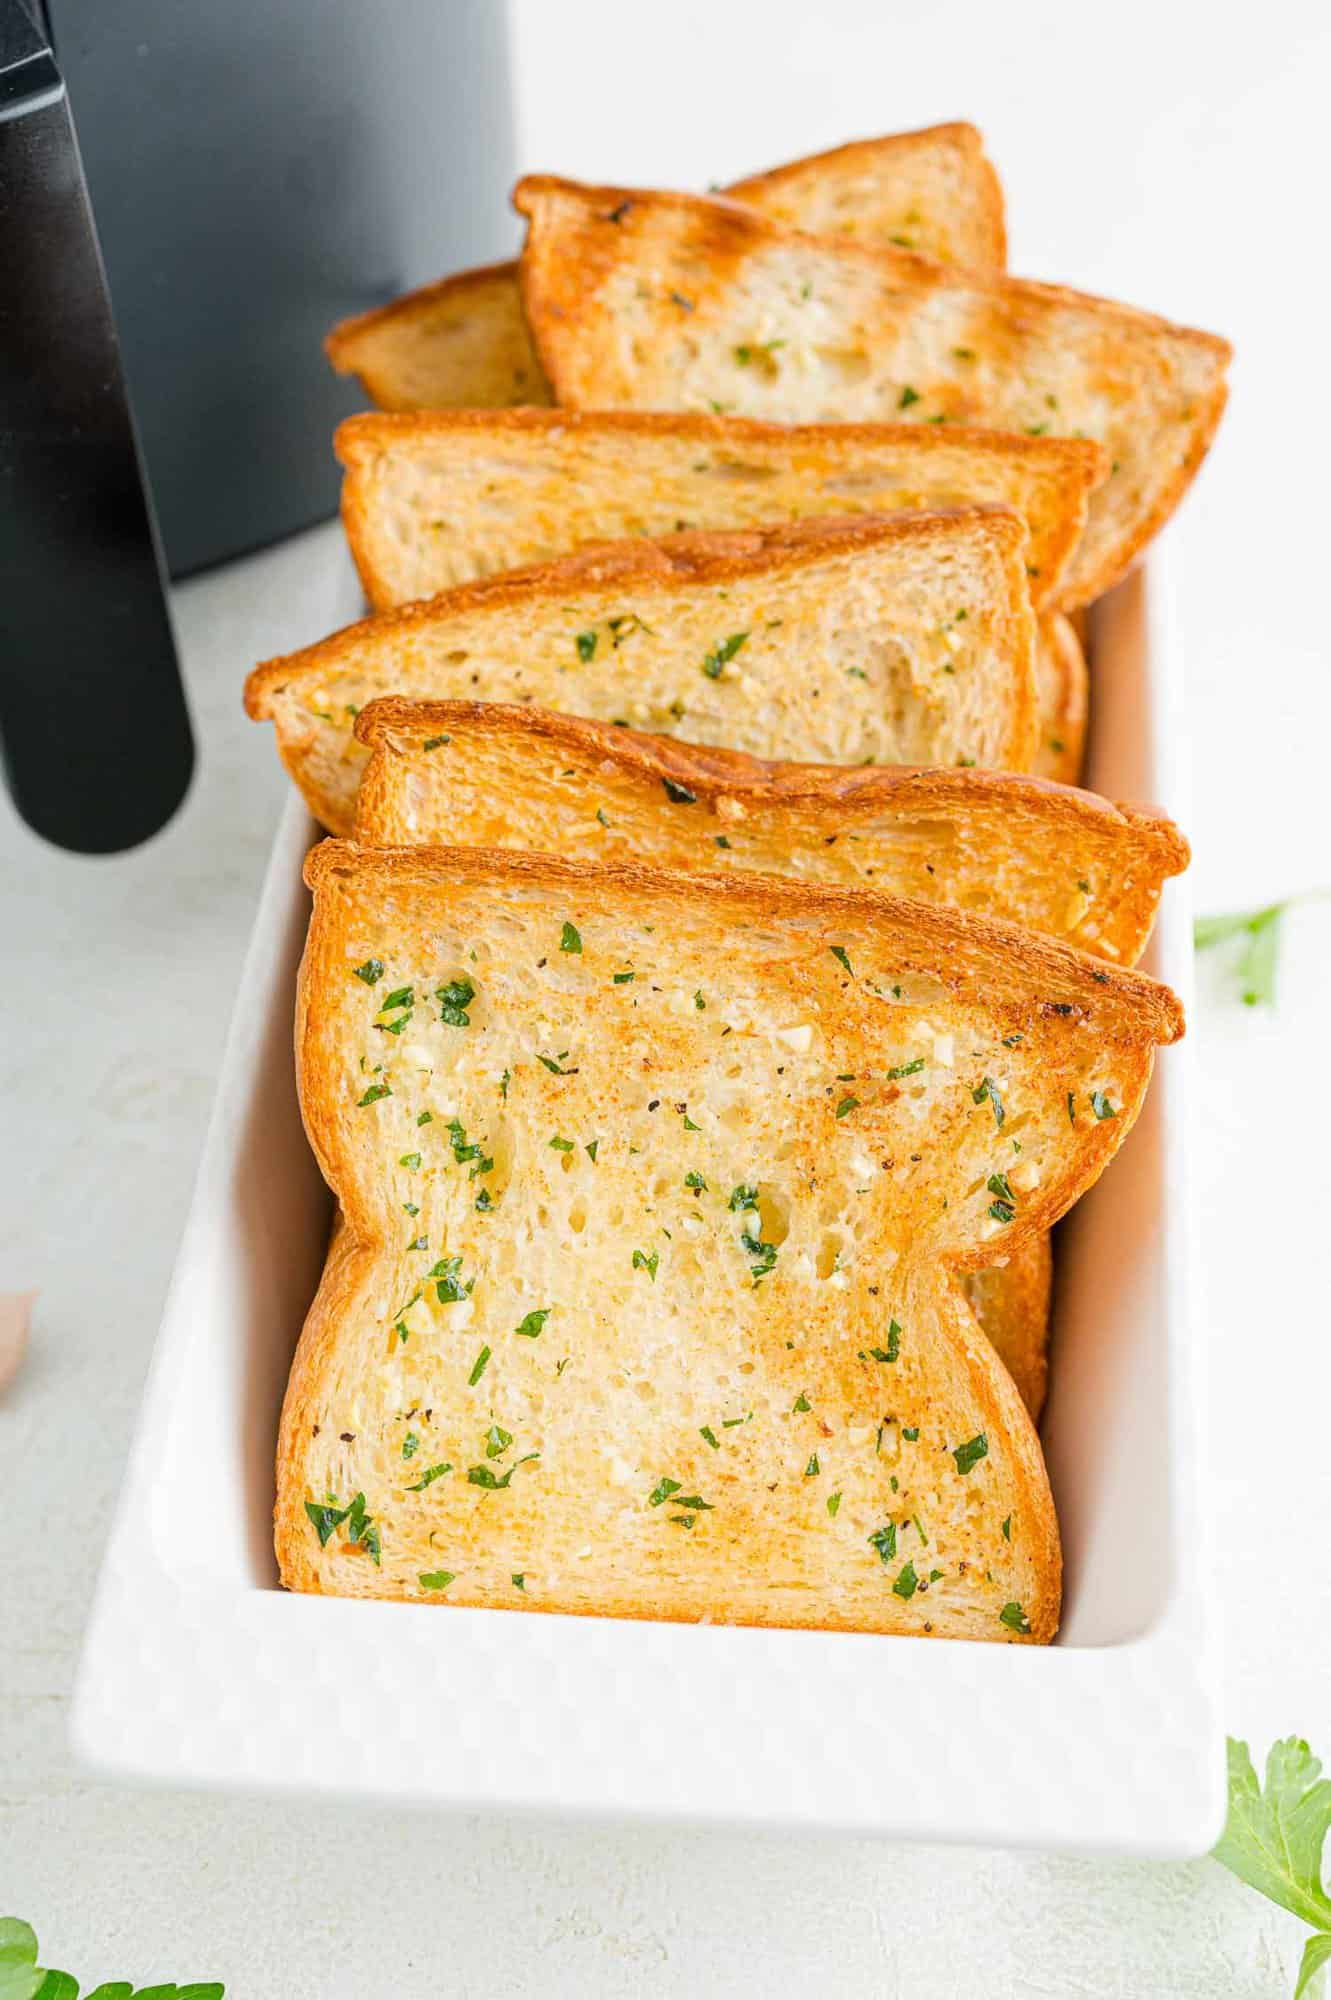 Slices of Texas toast garlic bread in a long rectangular serving tray, next to the air fryer.